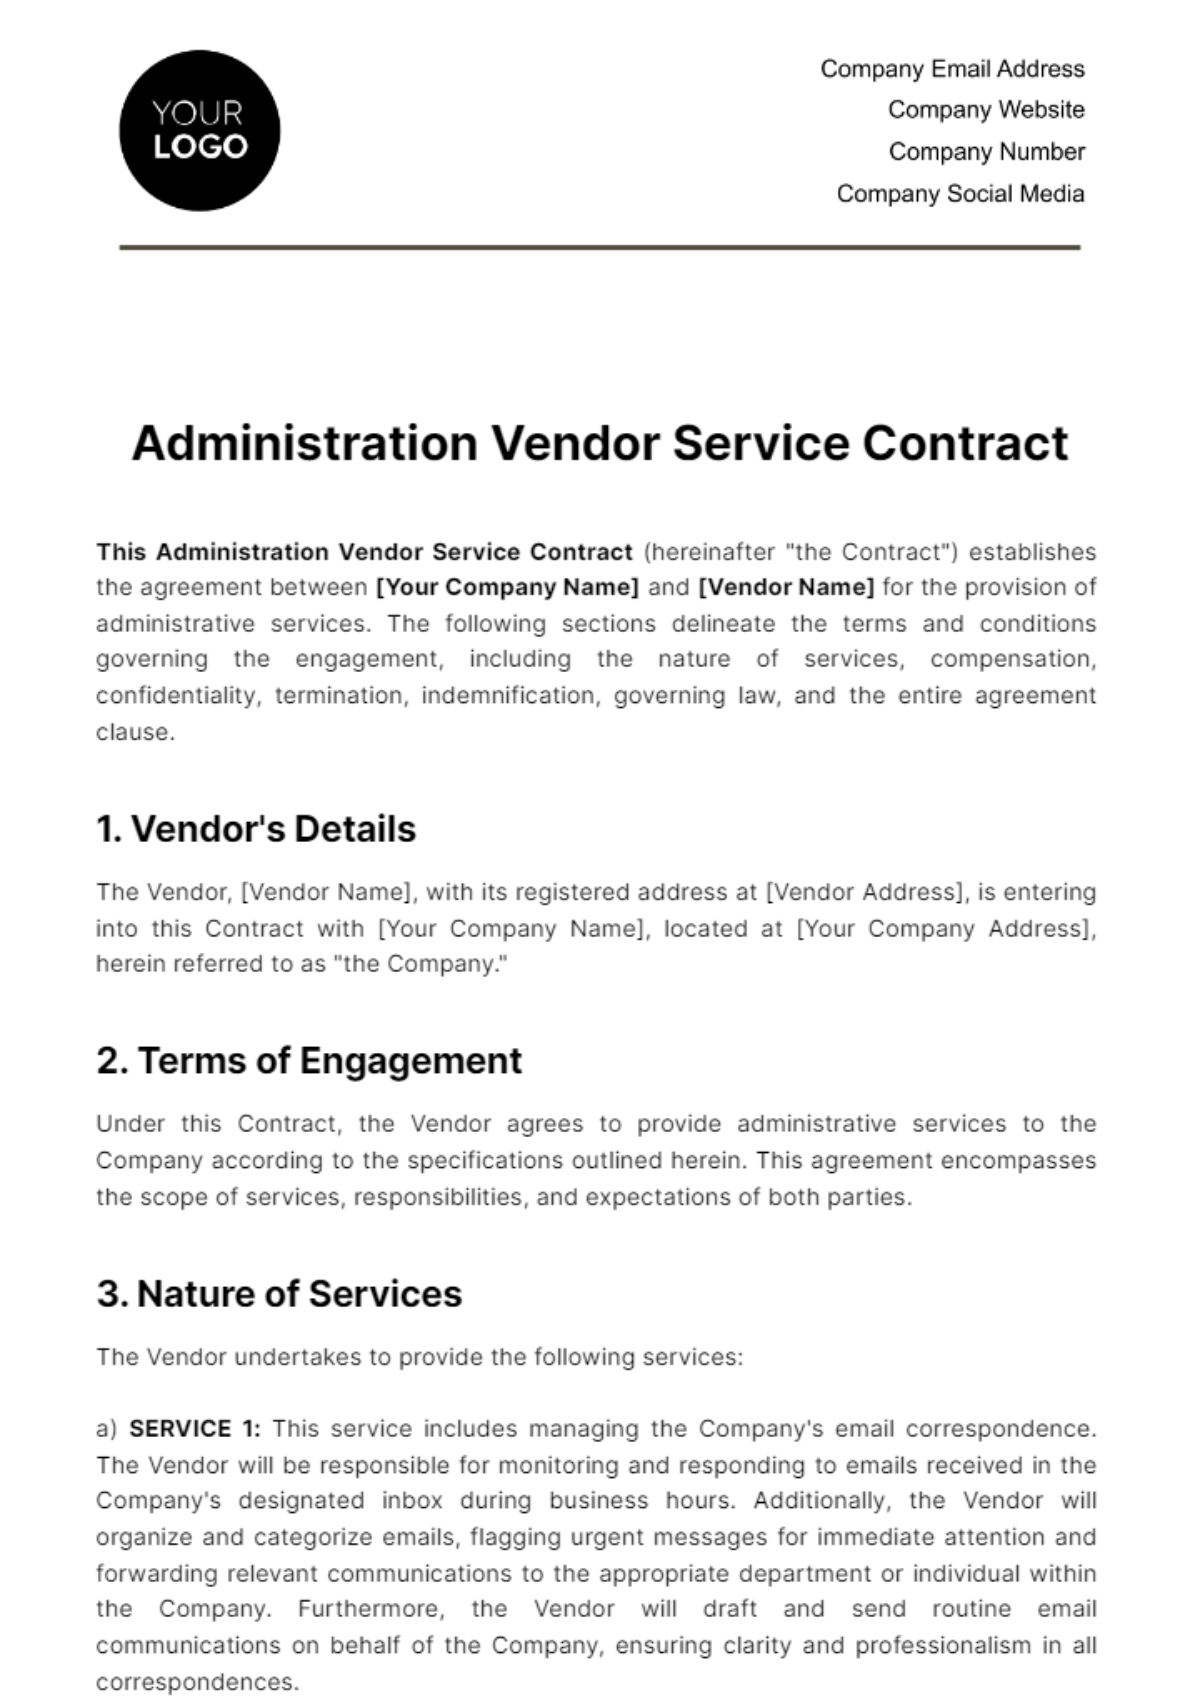 Free Administration Vendor Service Contract Template